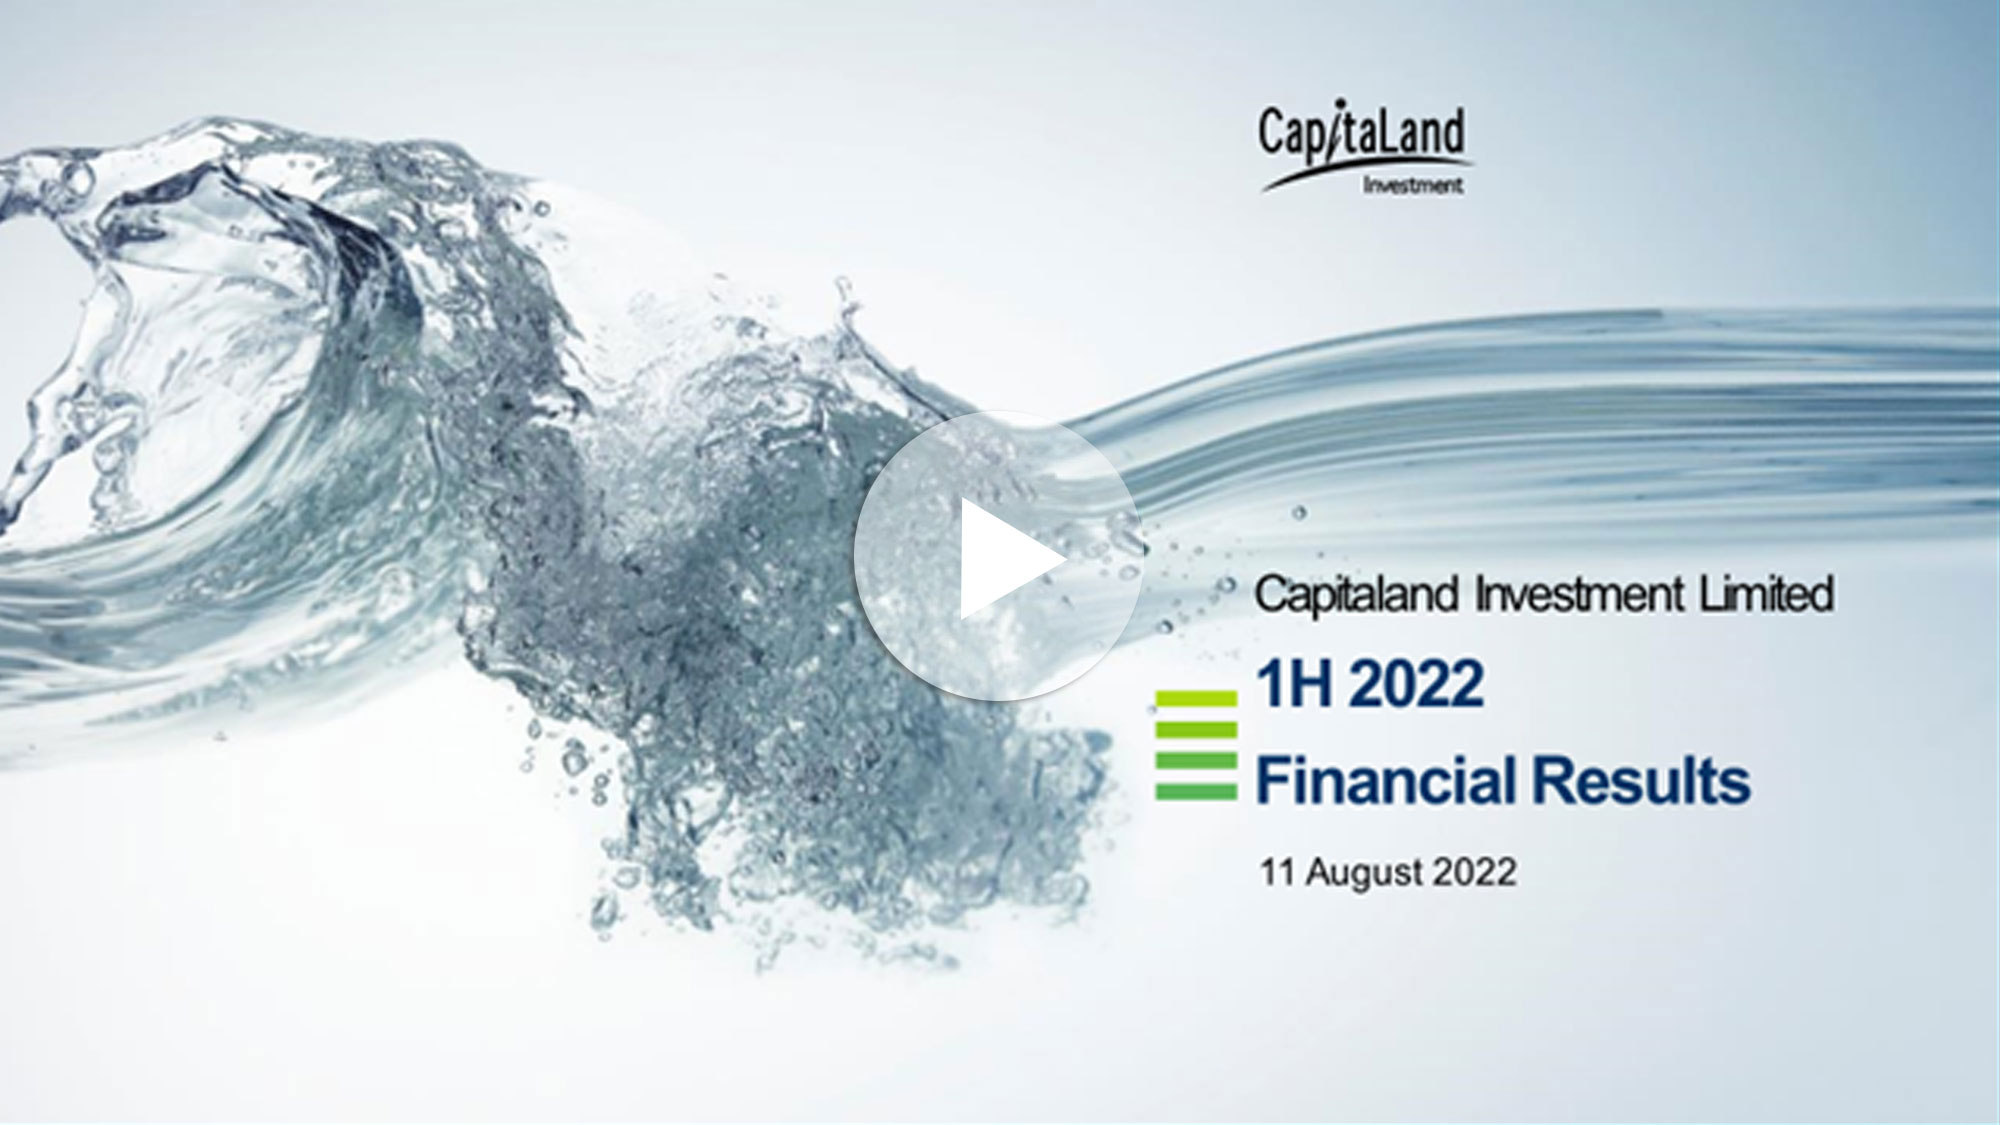 CapitaLand Investment Limited - 1H 2022 Financial Results Briefing